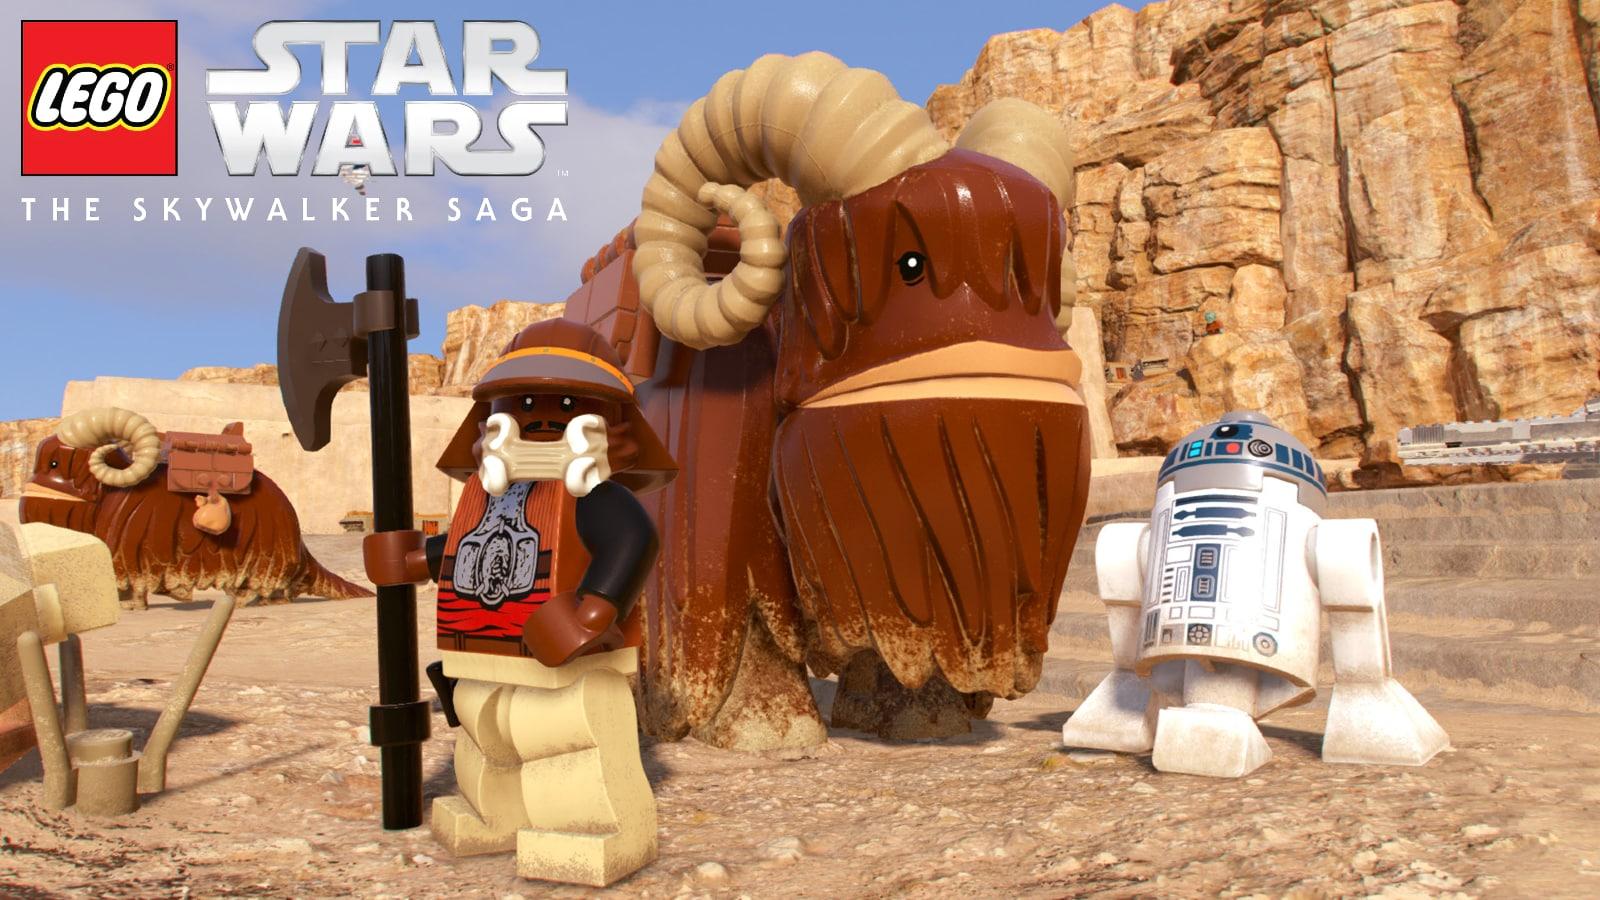 lego star wars the skywalker saga r2d2 stands with other characters in desert